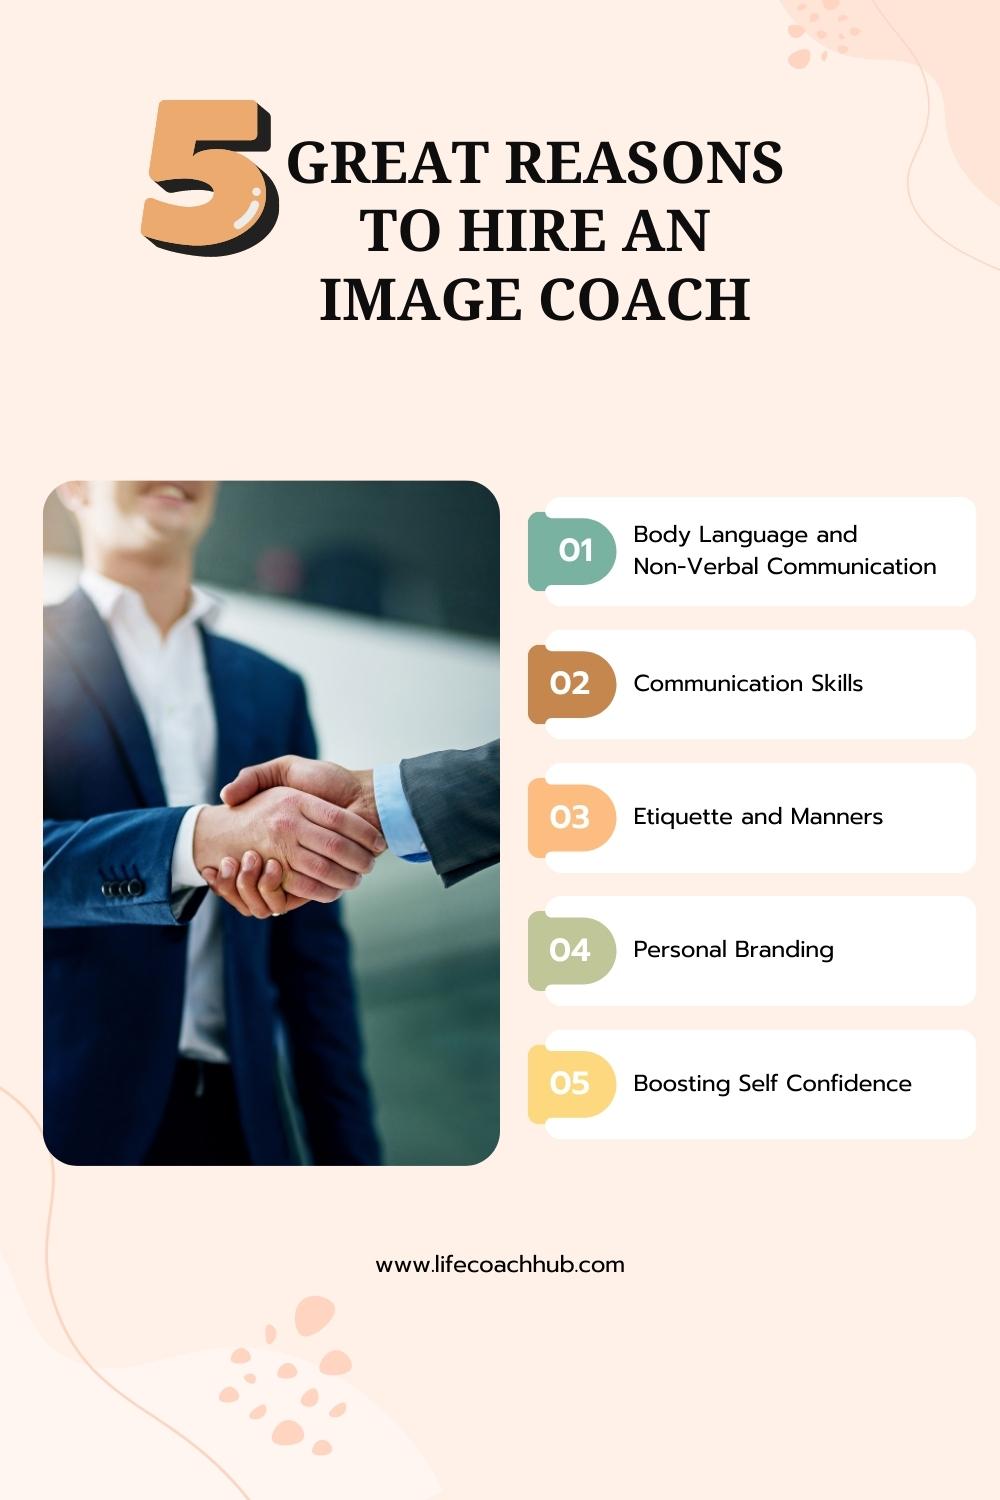 5 Great Reasons to hire an image coach